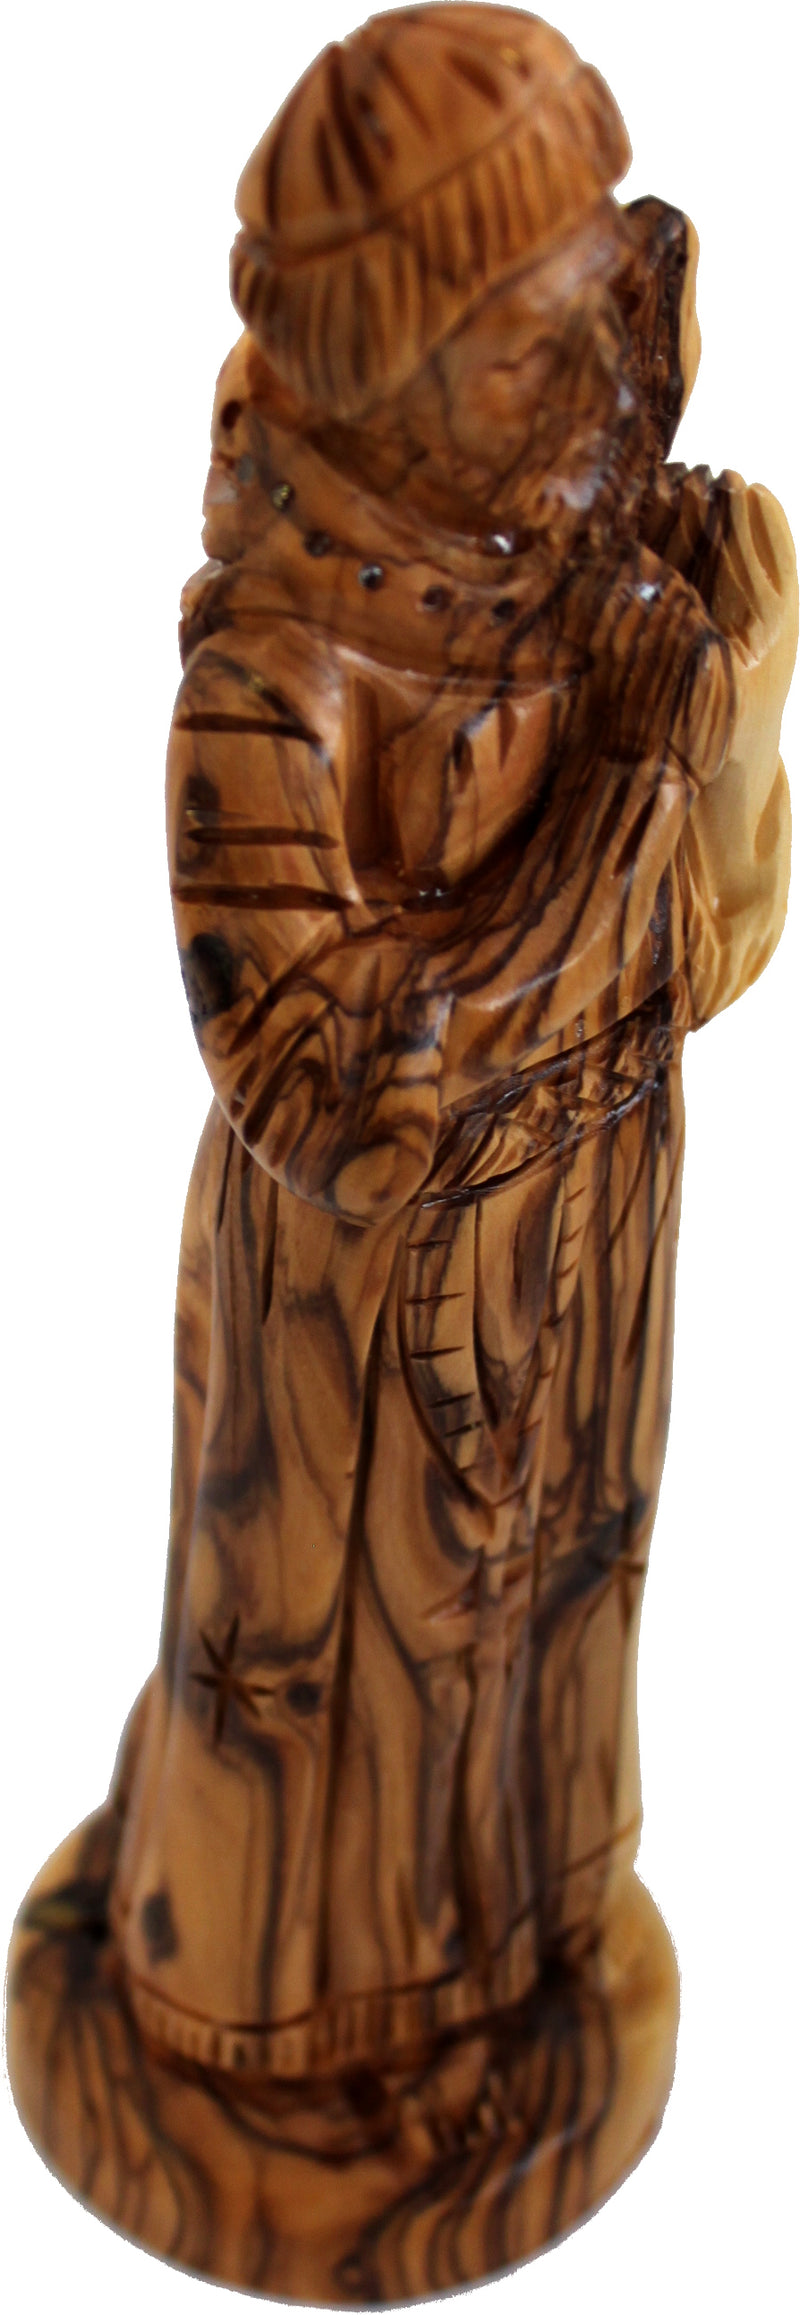 Holy Land Market Saint Francis of Assisi Carved in Olive Wood Figure Statue - 8.4 Inches